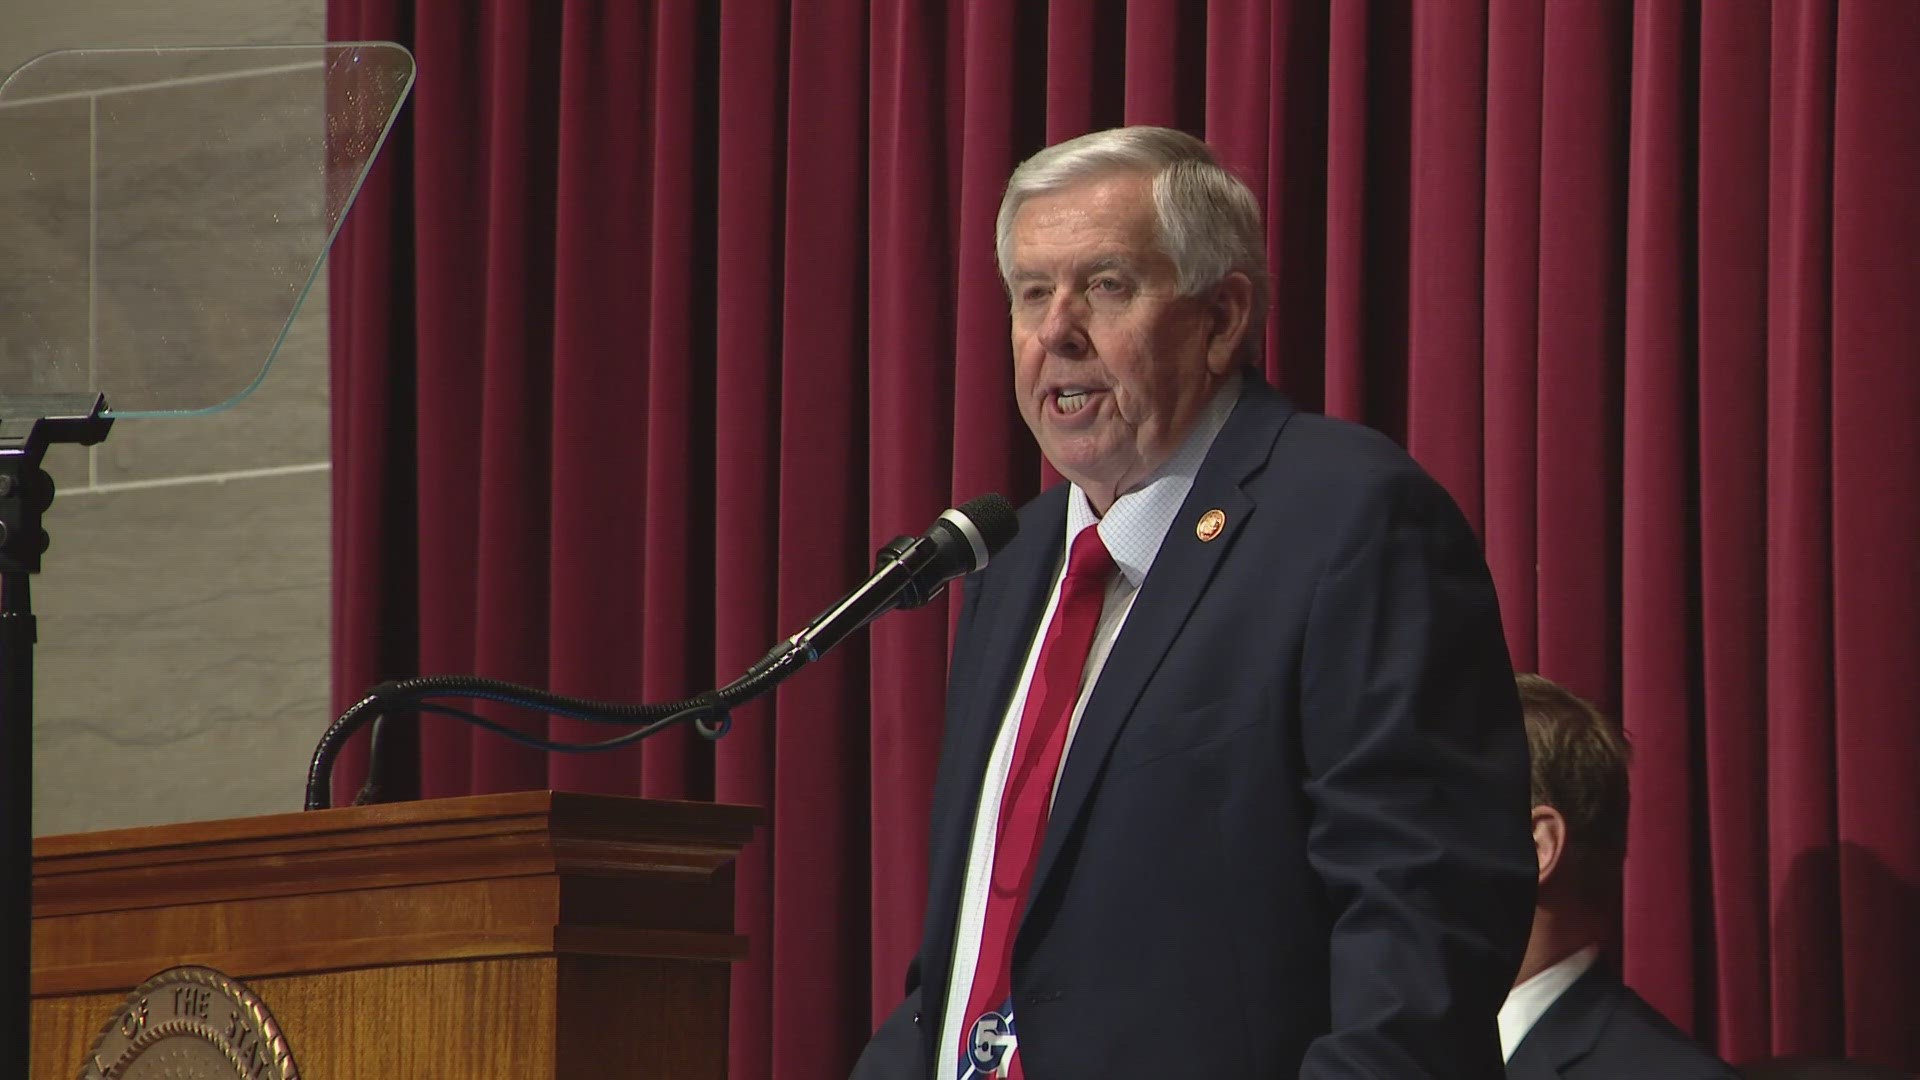 Missouri Governor Mike Parson is heading to Texas this weekend.
On Sunday he'll meet with other Republican governors to discuss U.S. border policy.